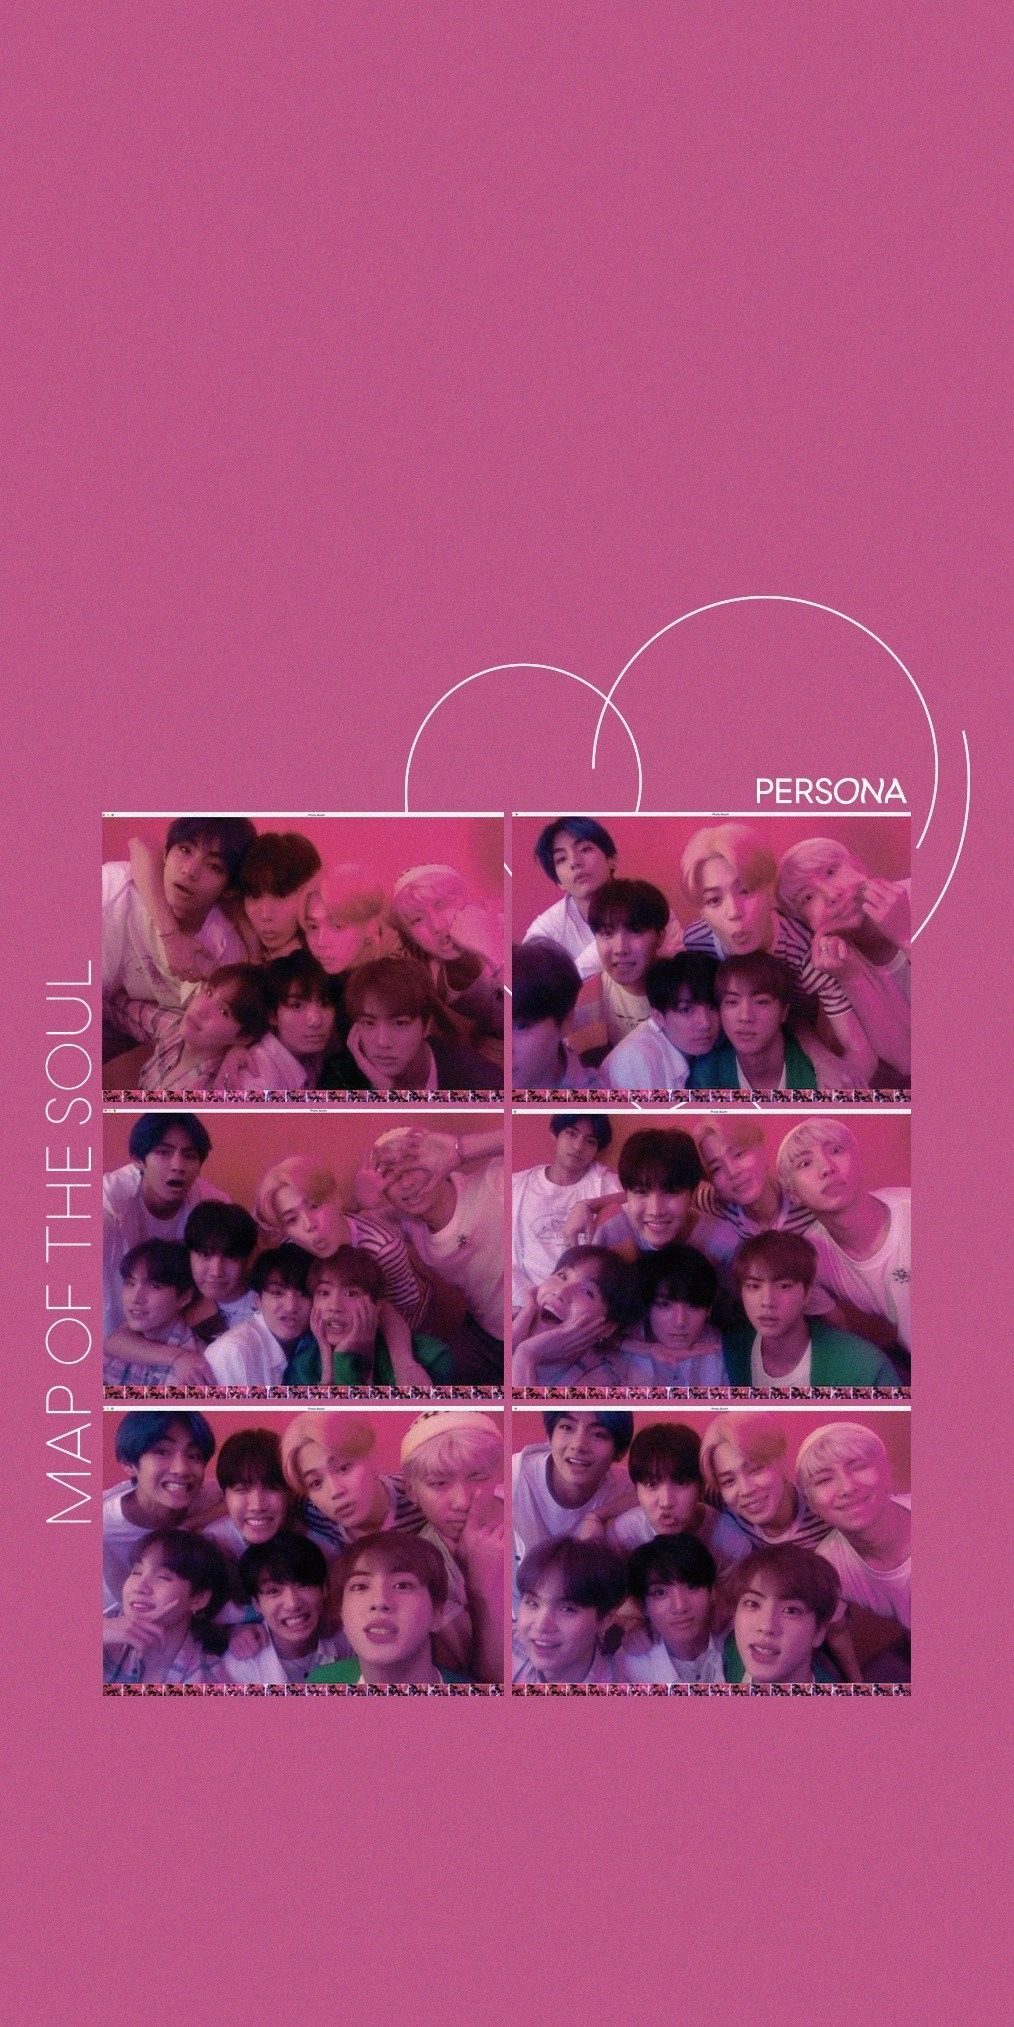 Map of The Soul:Persona Wallpaper. Bts wallpaper, Bts concept photo, Bts aesthetic picture